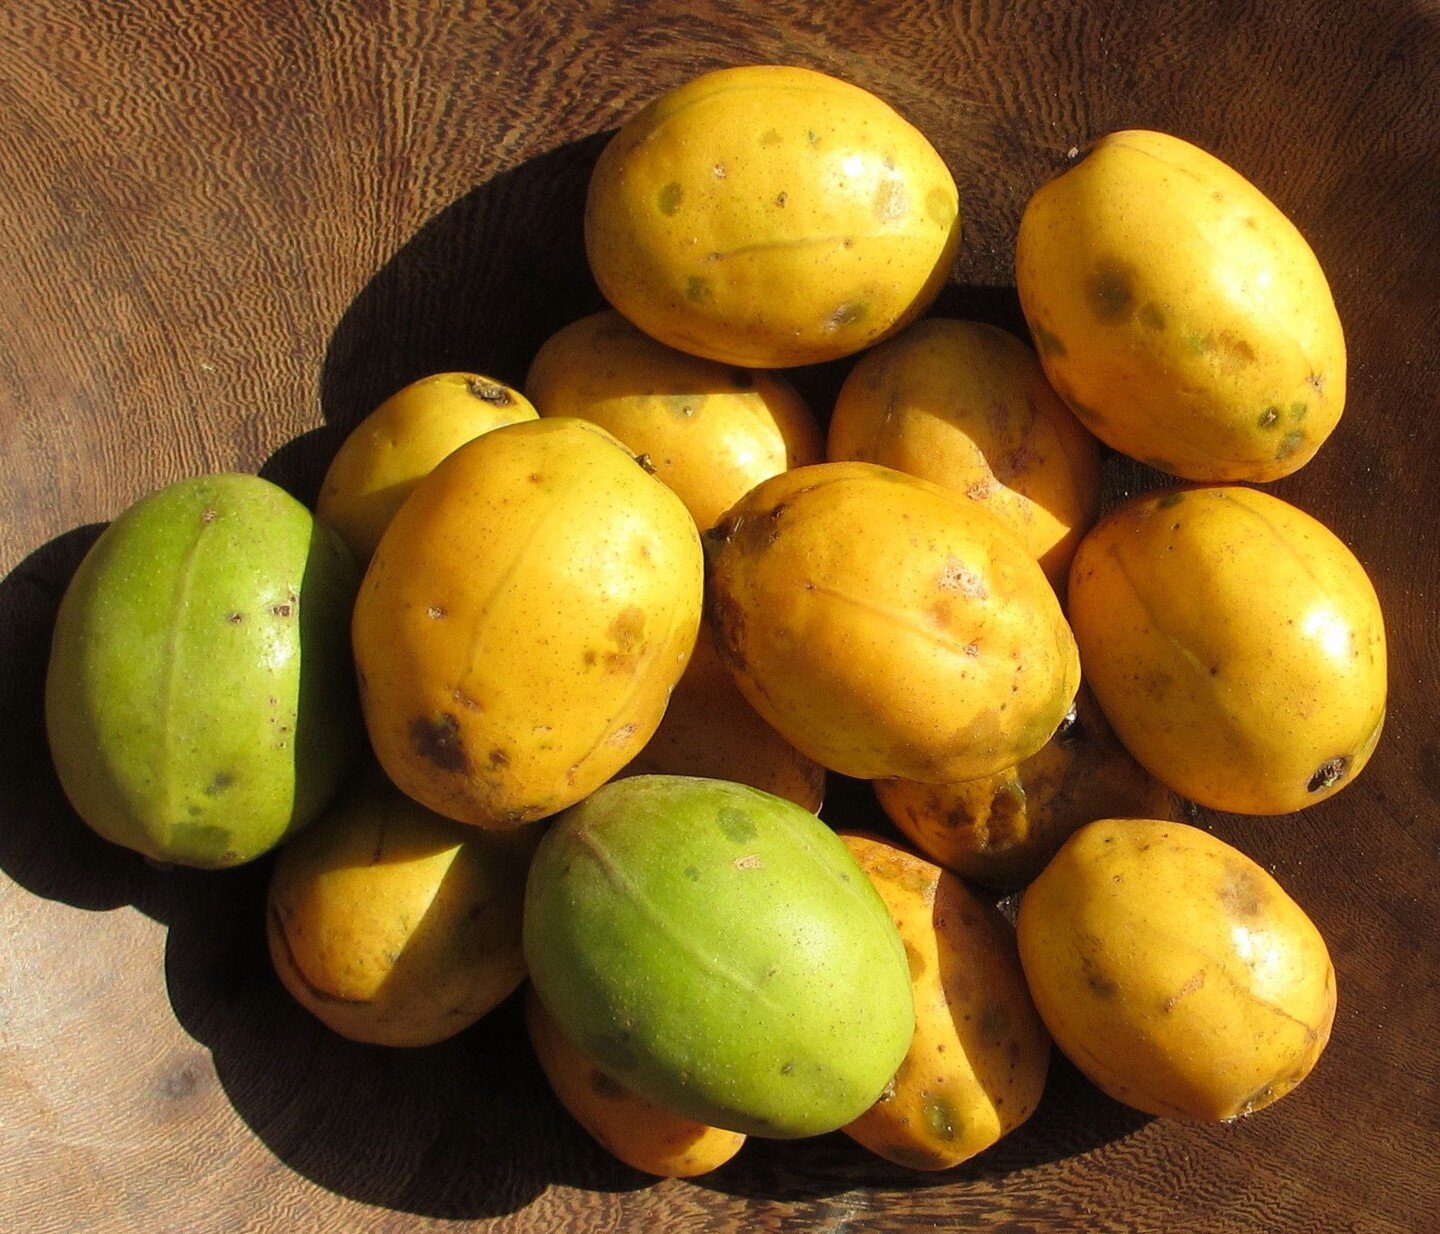 In the local Muani language in Mozambique, this fruit is called Embe Ngongo. It is rare in Mozambique and is cultivated in the coastal zone in the northern part of the country.

📍 Mozambique
📸 Ton Rulkens

#fruit #africanfruit #mozambique #embengon